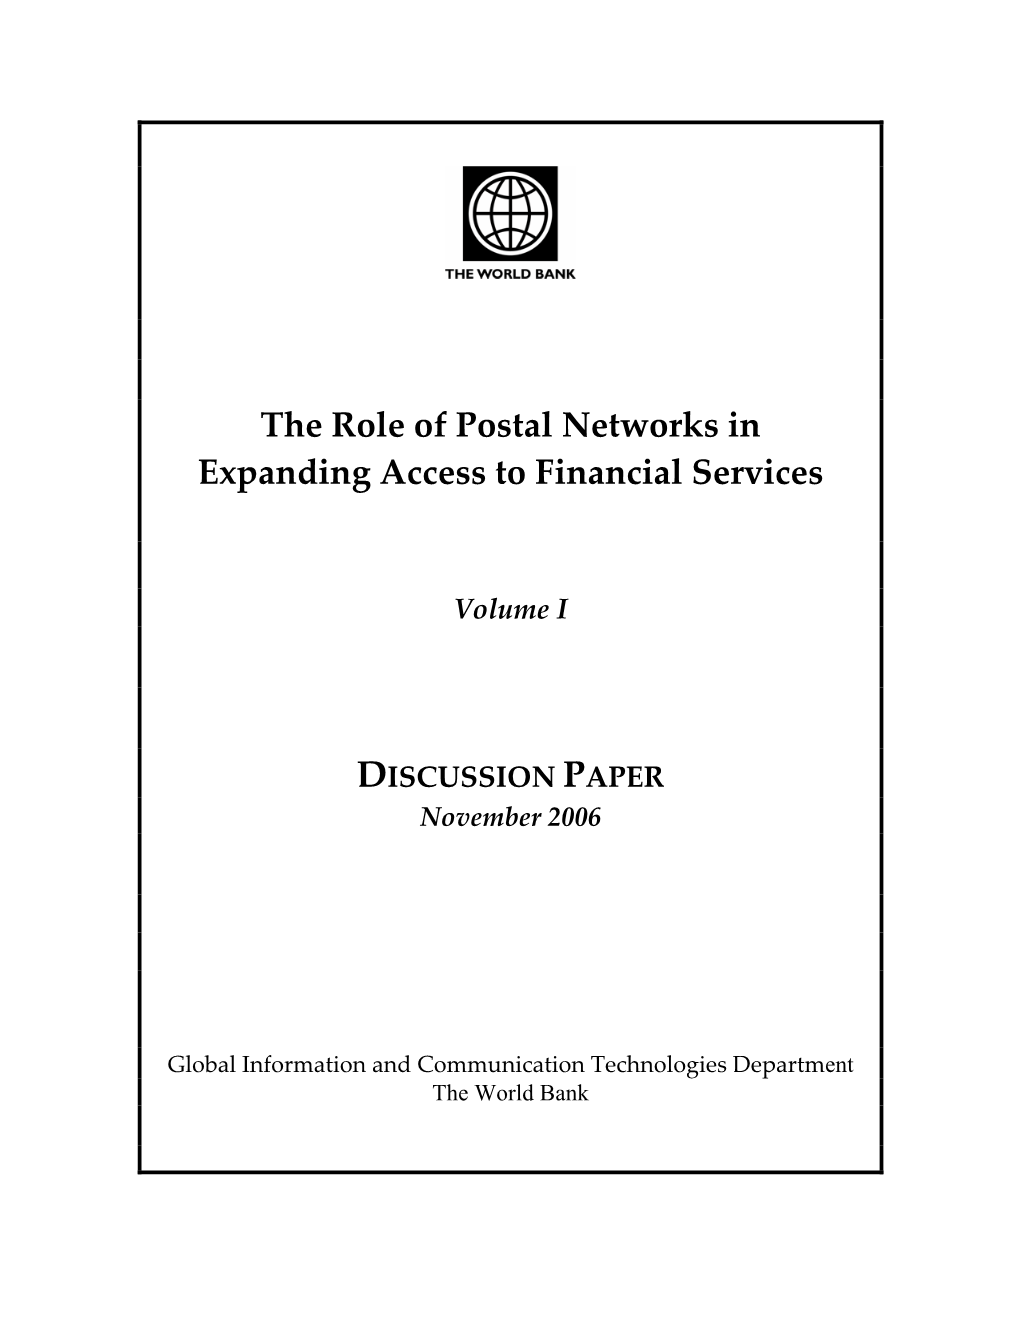 The Role of Postal Networks in Expanding Access to Financial Services